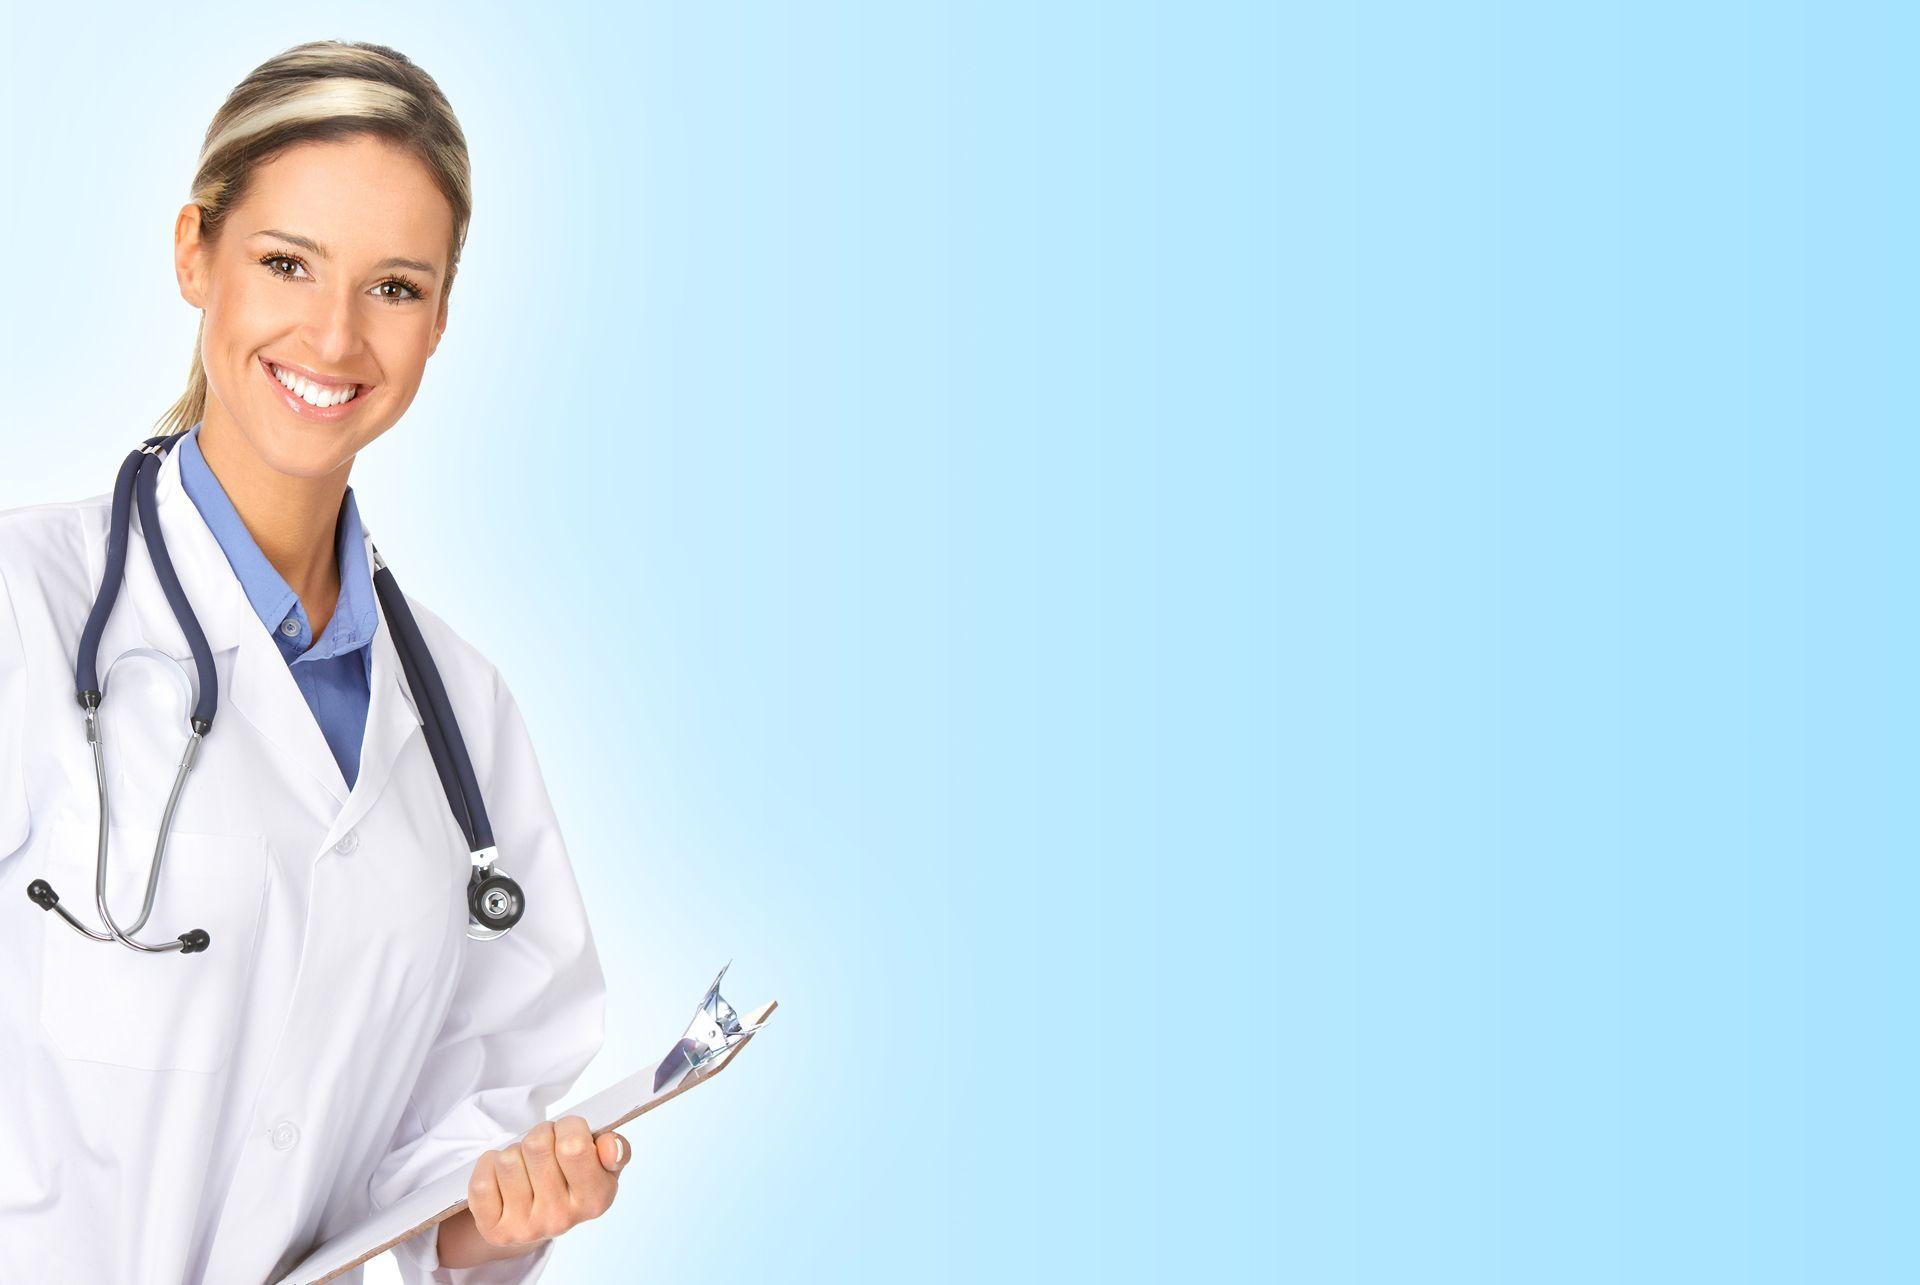 Free Medical Doctor Woman Background For PowerPoint